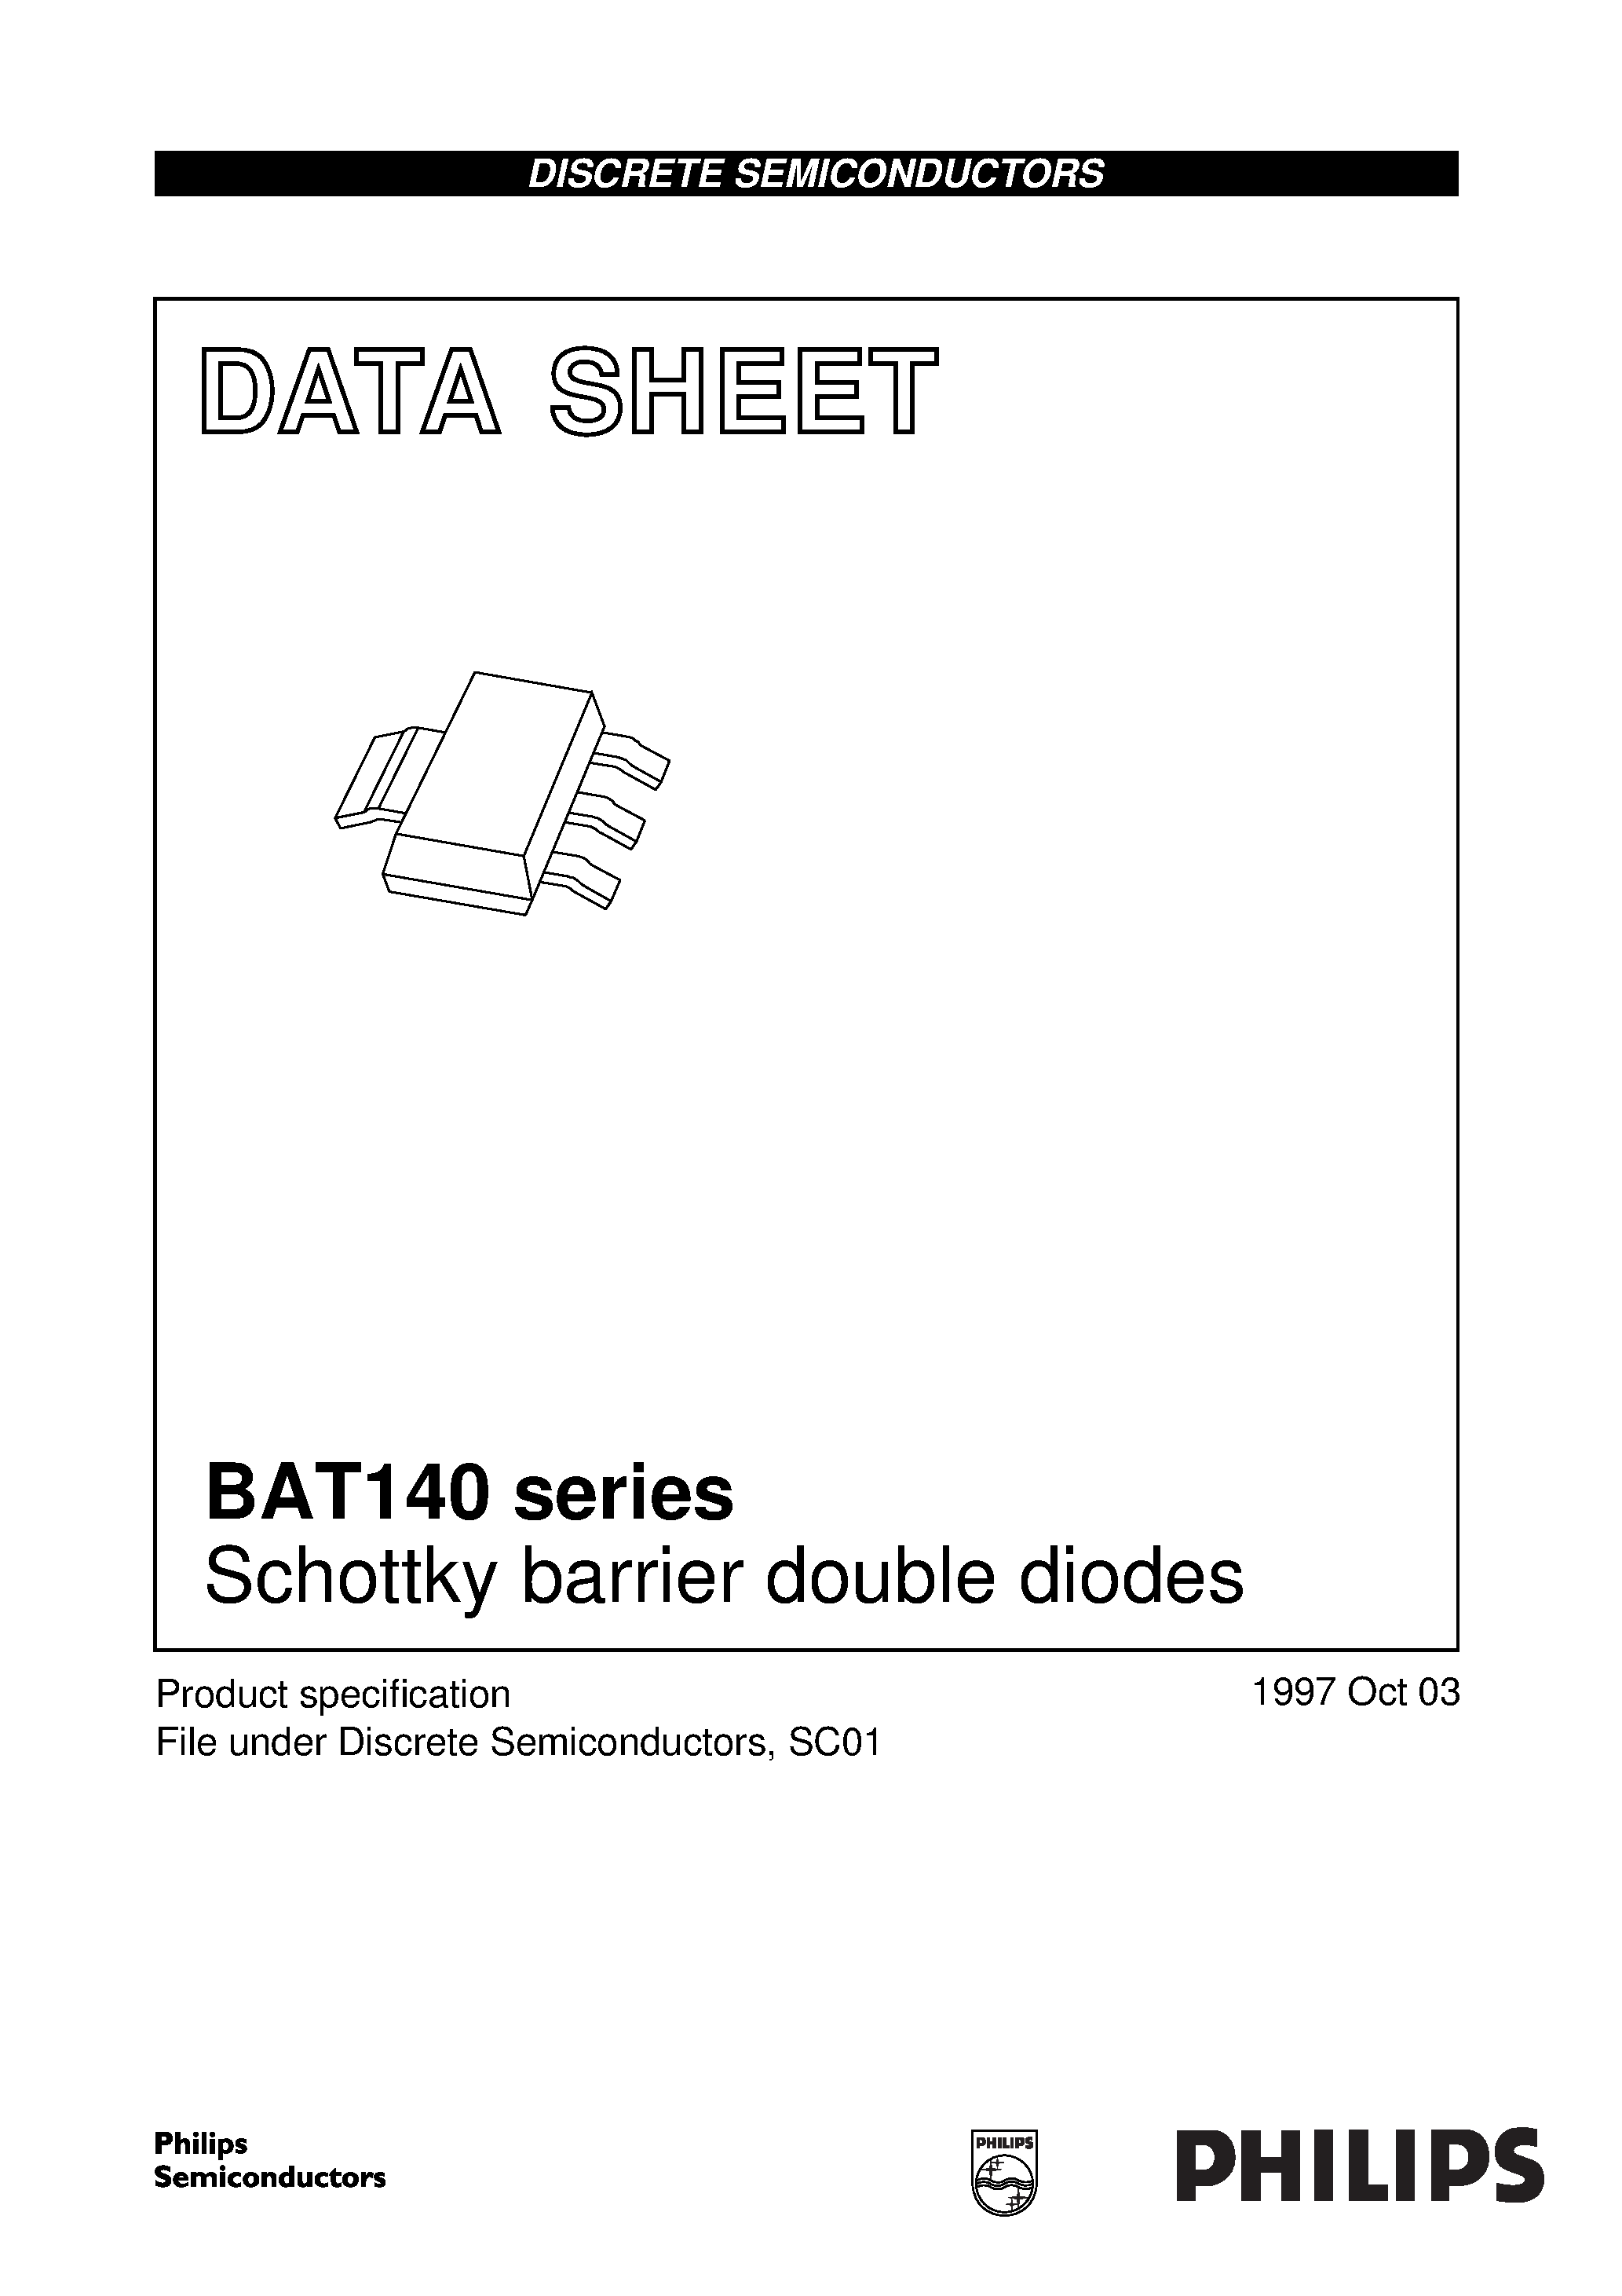 Даташит BAT140C - Schottky barrier double diodes страница 1